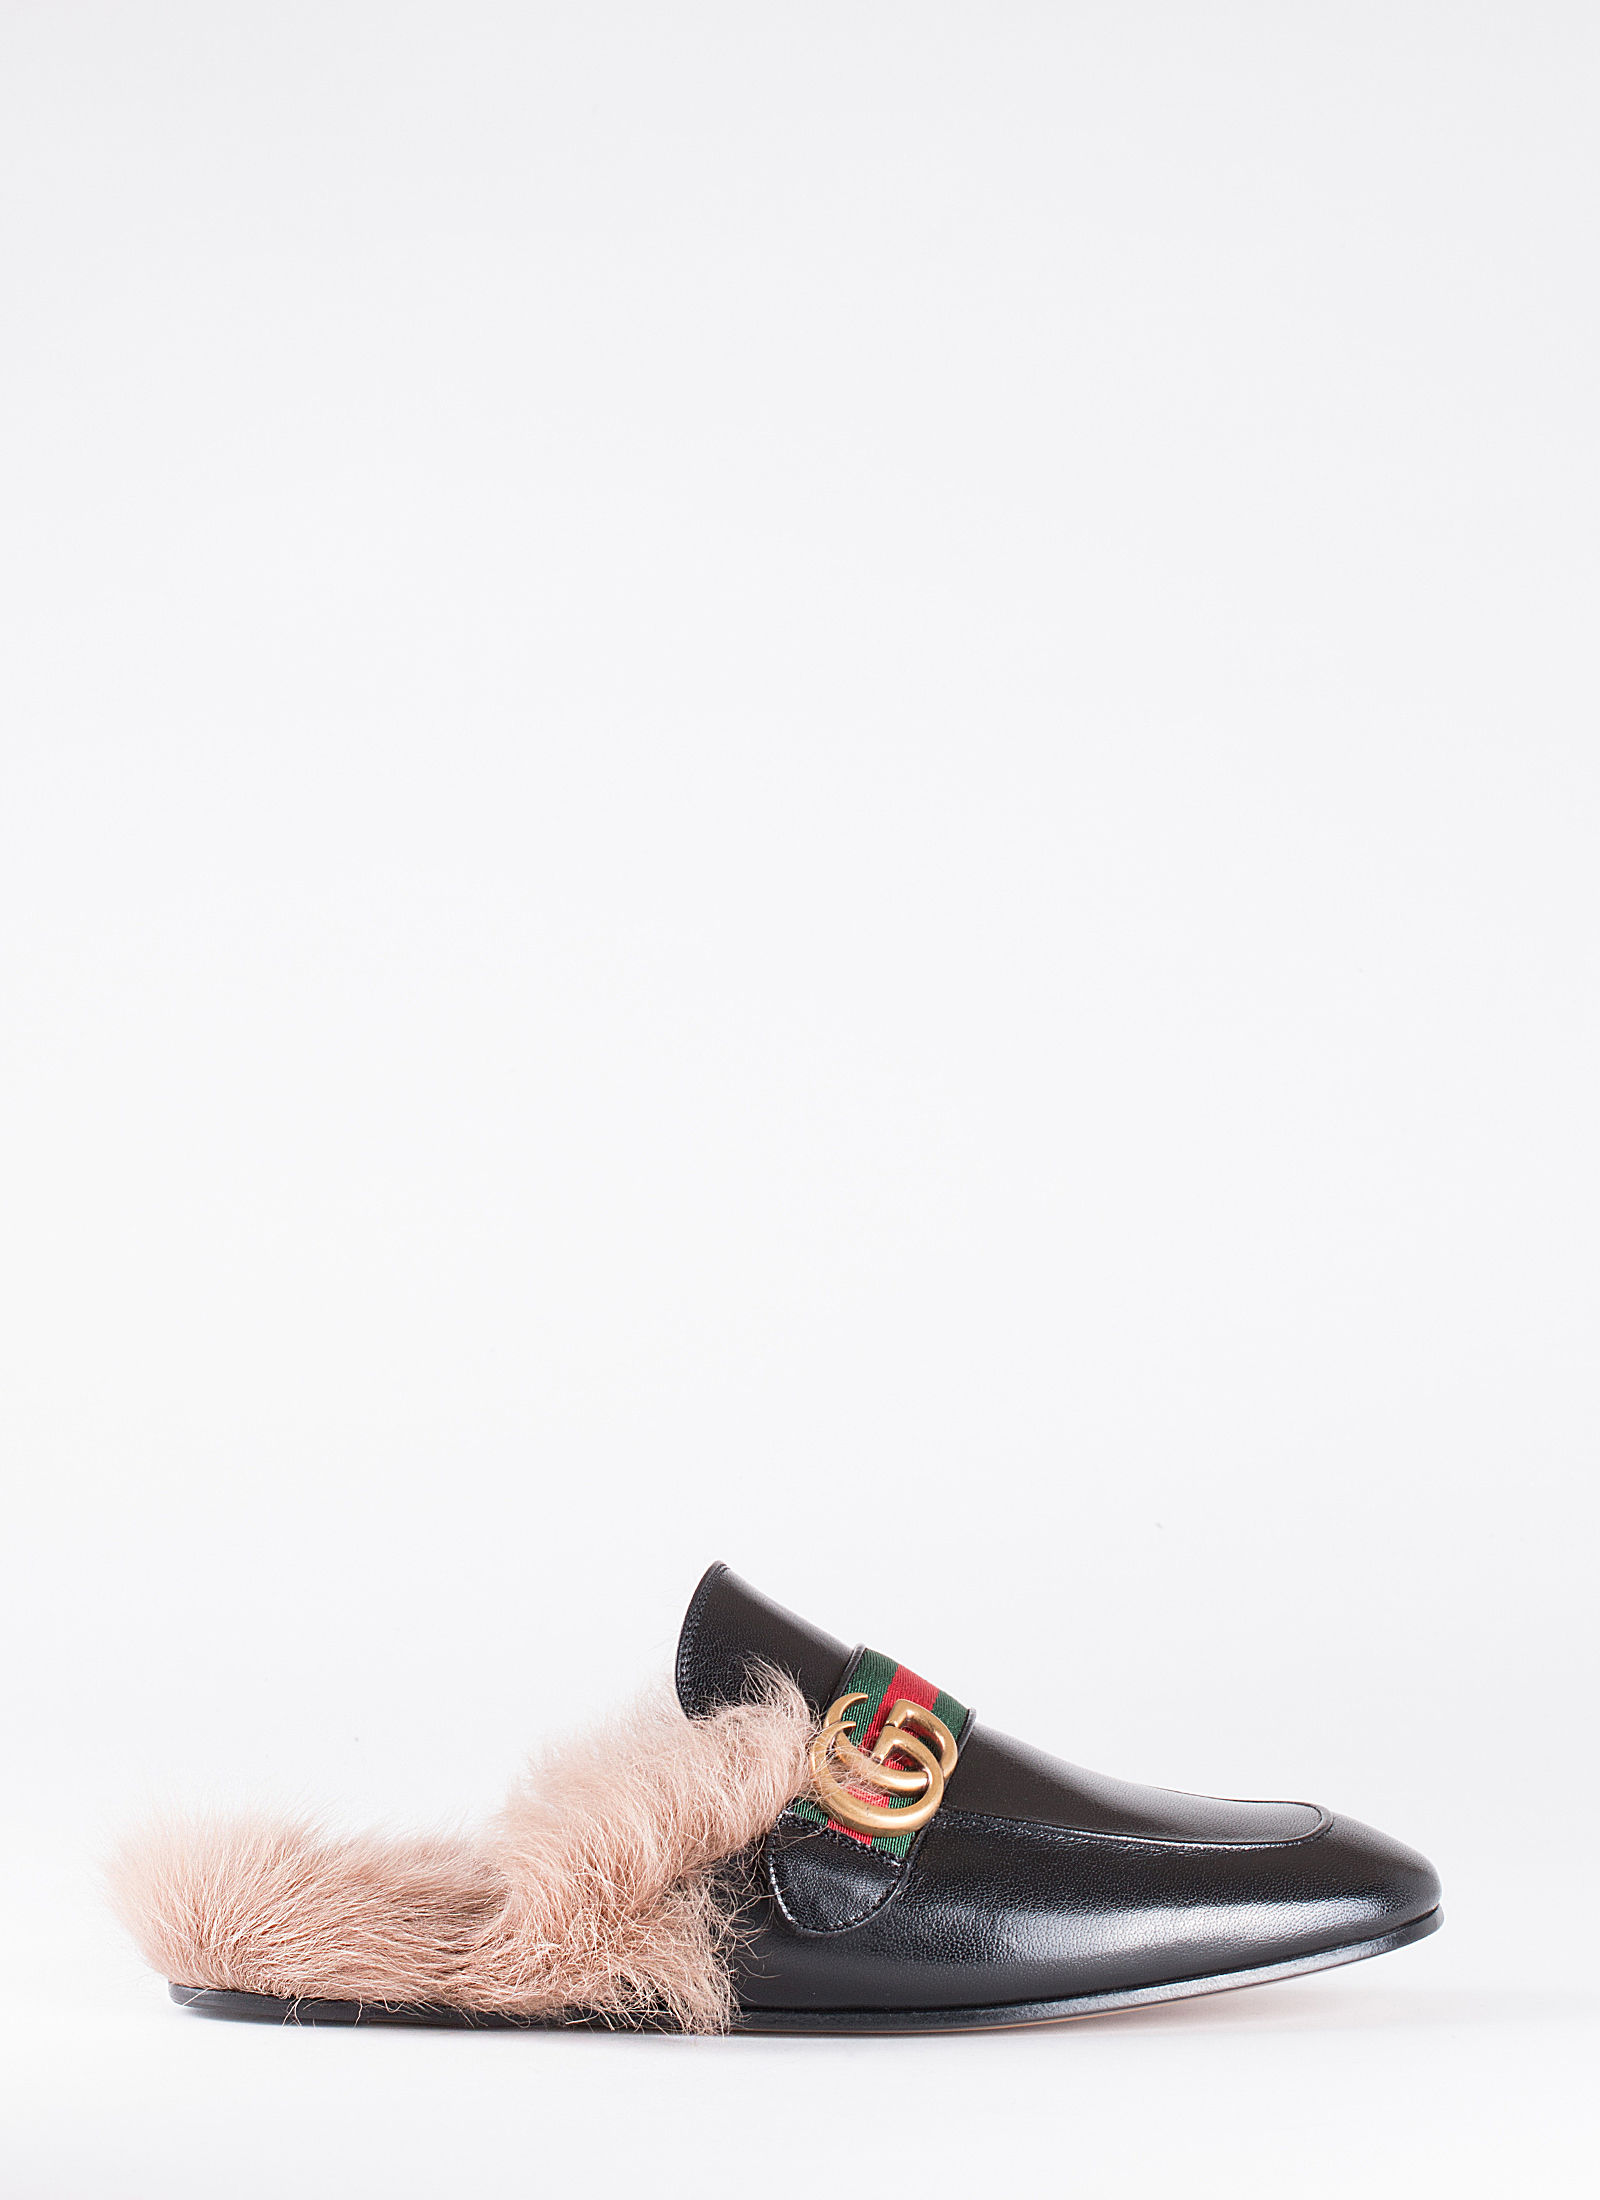 LEATHER CLOTS WITH FUR - GUCCI